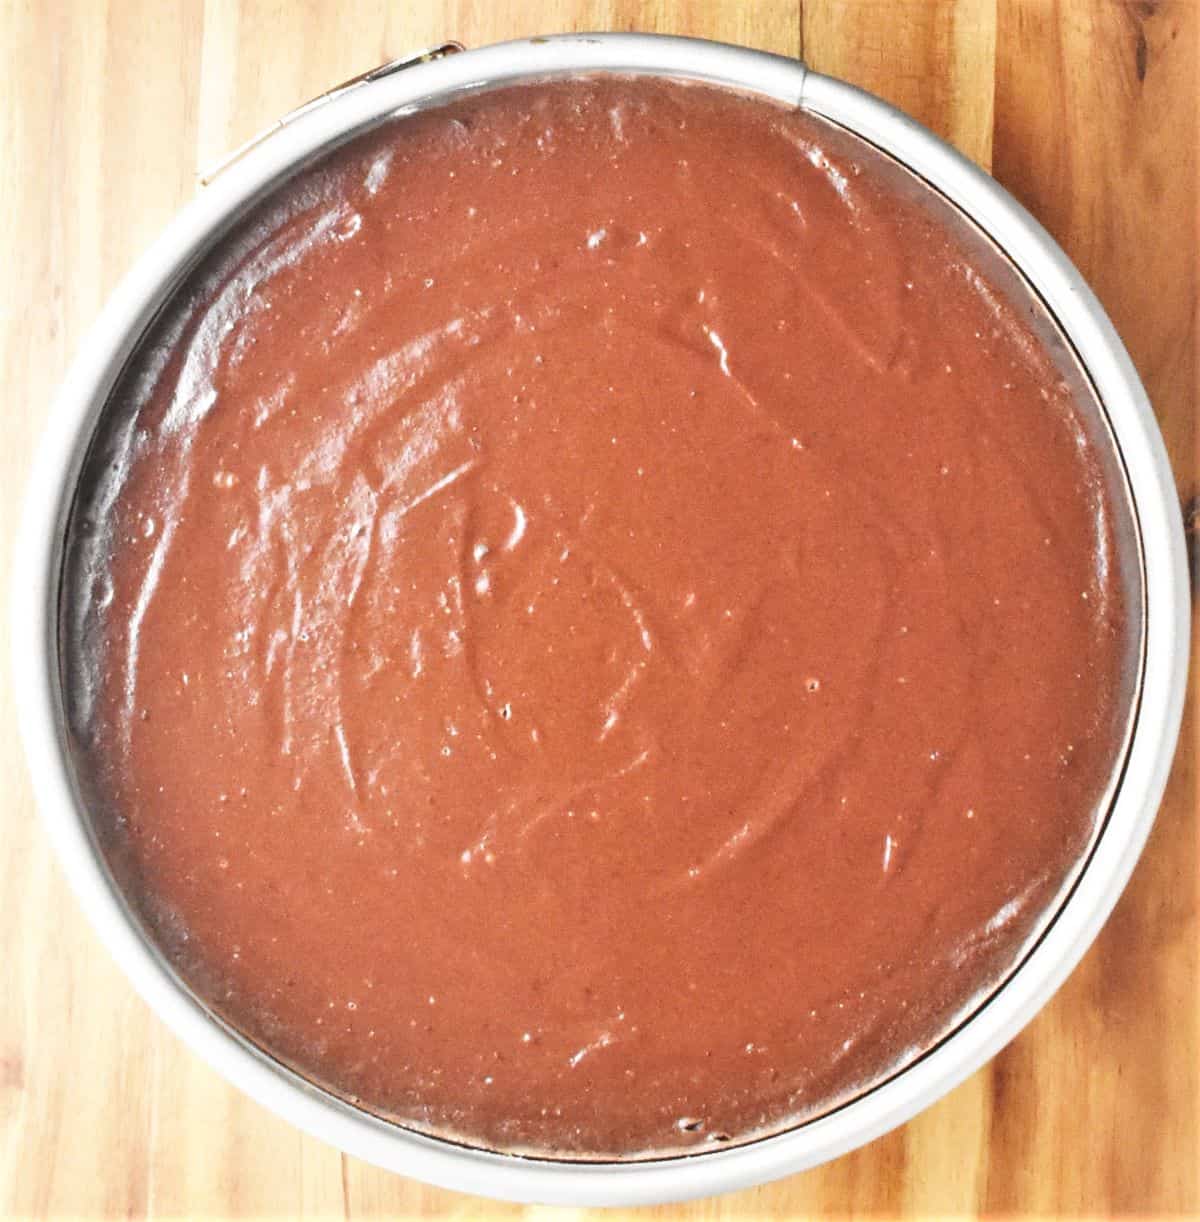 Top down view of baked chocolate cheesecake in pan.